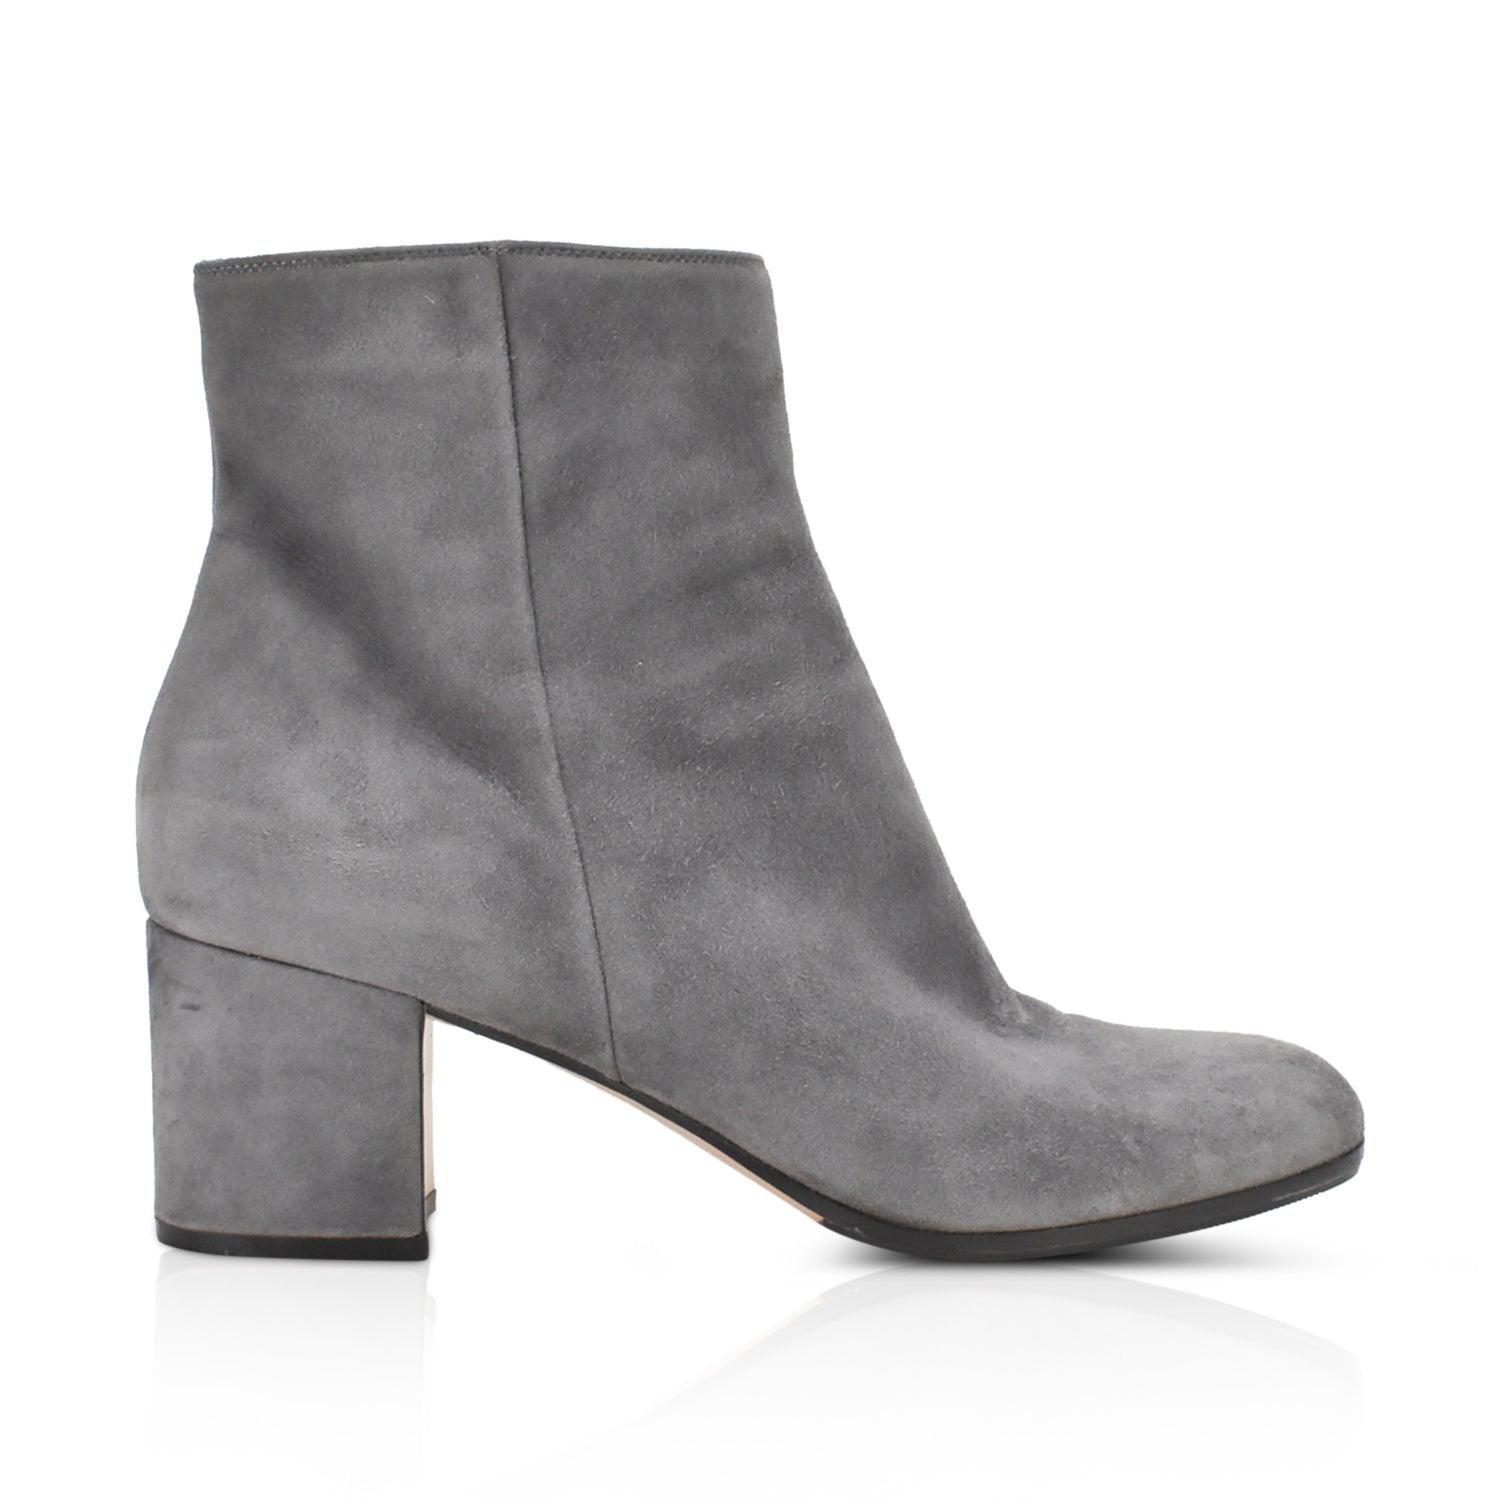 Gianvito Rossi Boots - Women's 41 - Fashionably Yours